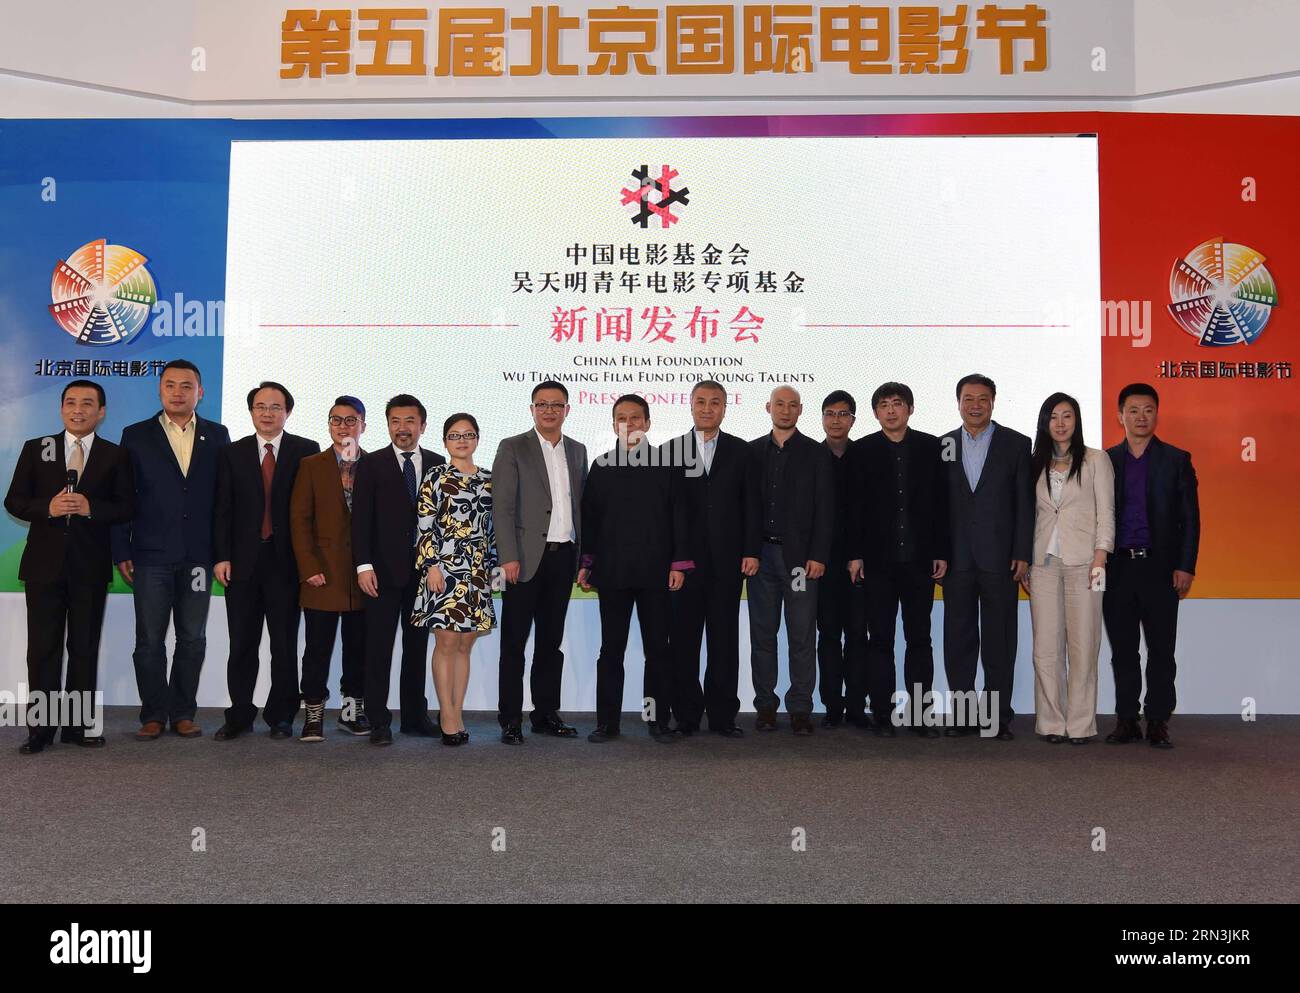 (150419) -- BEIJING, April 19, 2015 -- Guests pose for a group picture at a press conference of China Film Foundation Wu Tianming Film Fund for Young Talents during the fifth Beijing International Film Festival (BJIFF) in Beijing, capital of China, April 19, 2015. Wu Tianming was a leading figure of China s Fourth Generation film directors. His major works include Old Well and Life . ) (wjq) CHINA-BEIJING-FILM FESTIVAL-WU TIANMING FILM FUND-CONFERENCE (CN) LuoxXiaoguang PUBLICATIONxNOTxINxCHN   Beijing April 19 2015 Guests Pose for a Group Picture AT a Press Conference of China Film Foundation Stock Photo